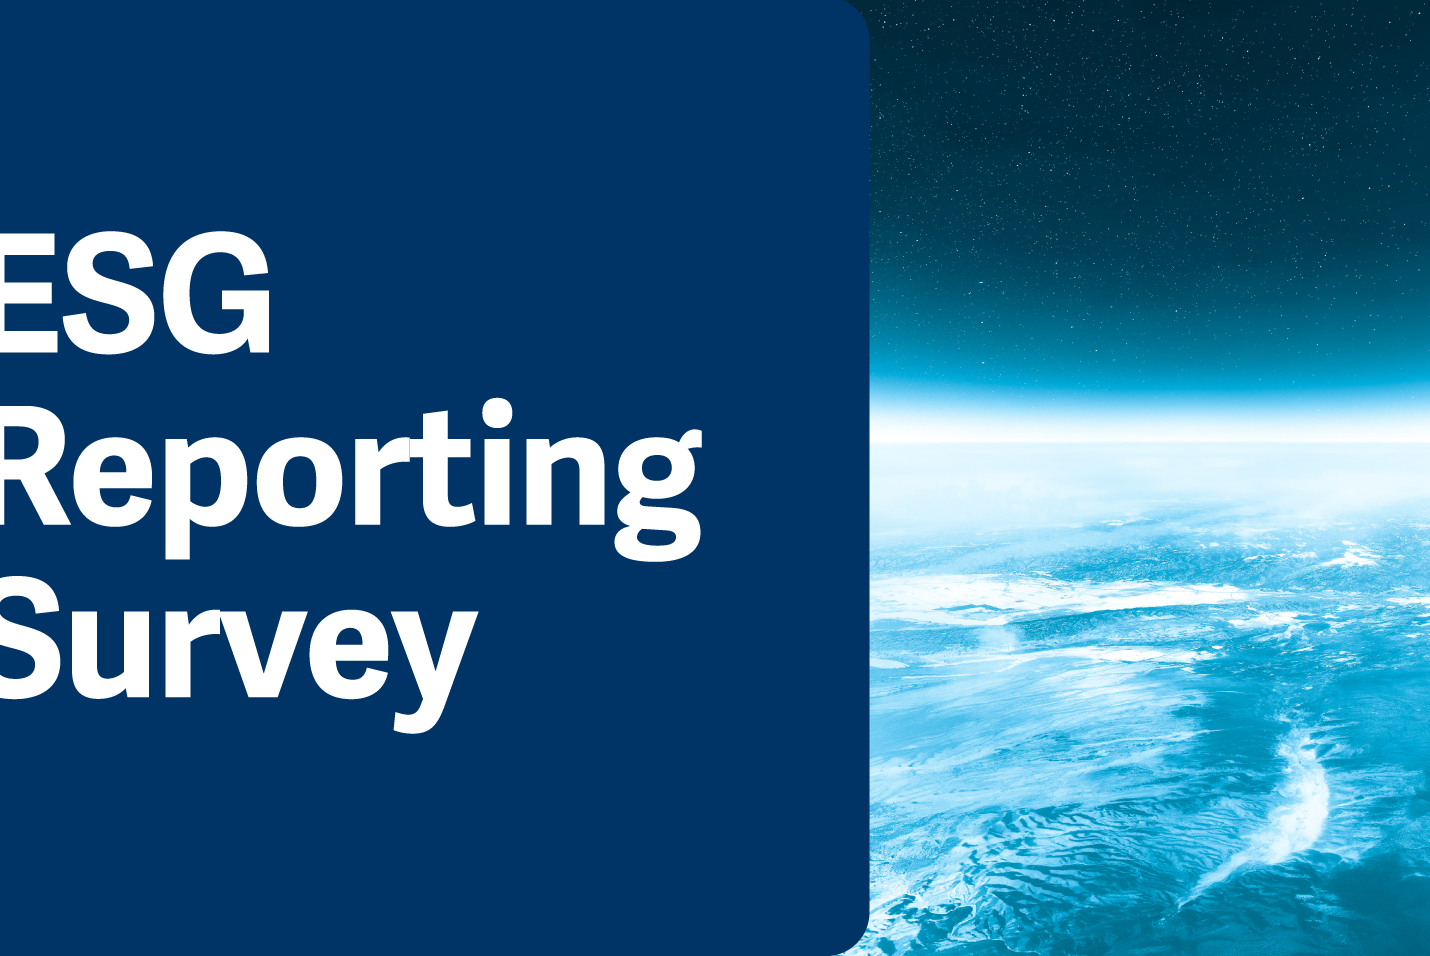 Global survey: 90% believe strong ESG reporting to give their organizations competitive advantage